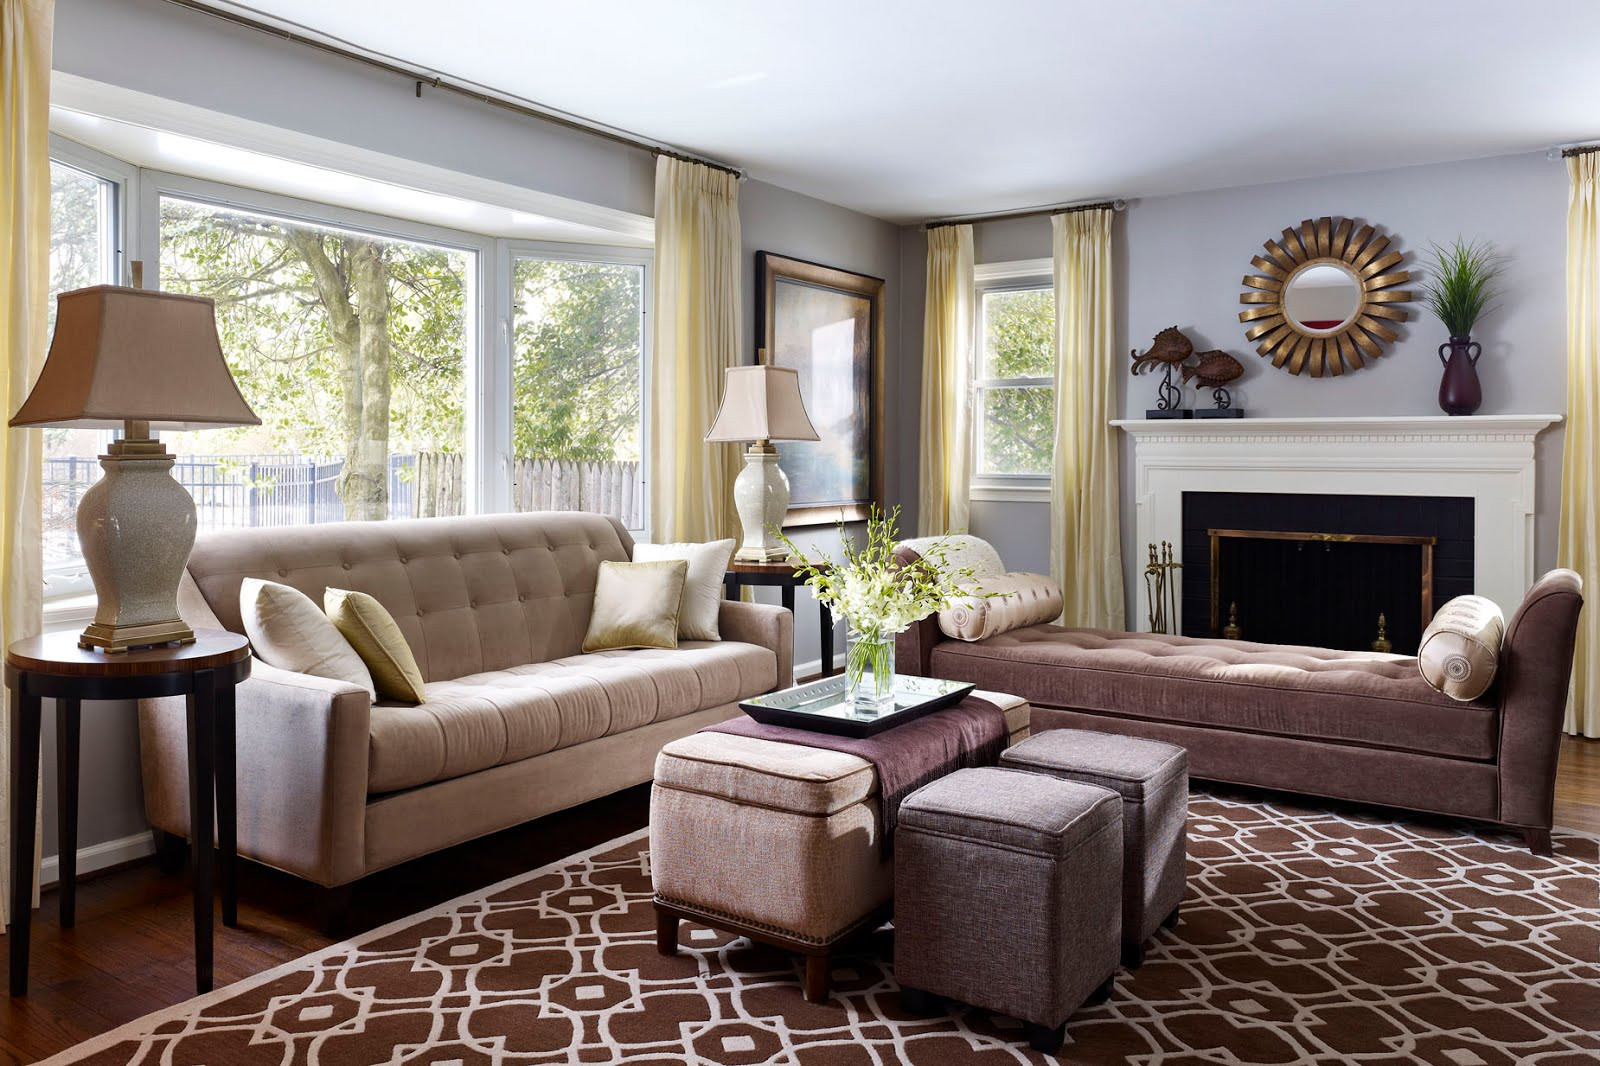 Transitional Decorating Ideas Living Room
 How to Decorate a Transitional Living Room HotPads Blog